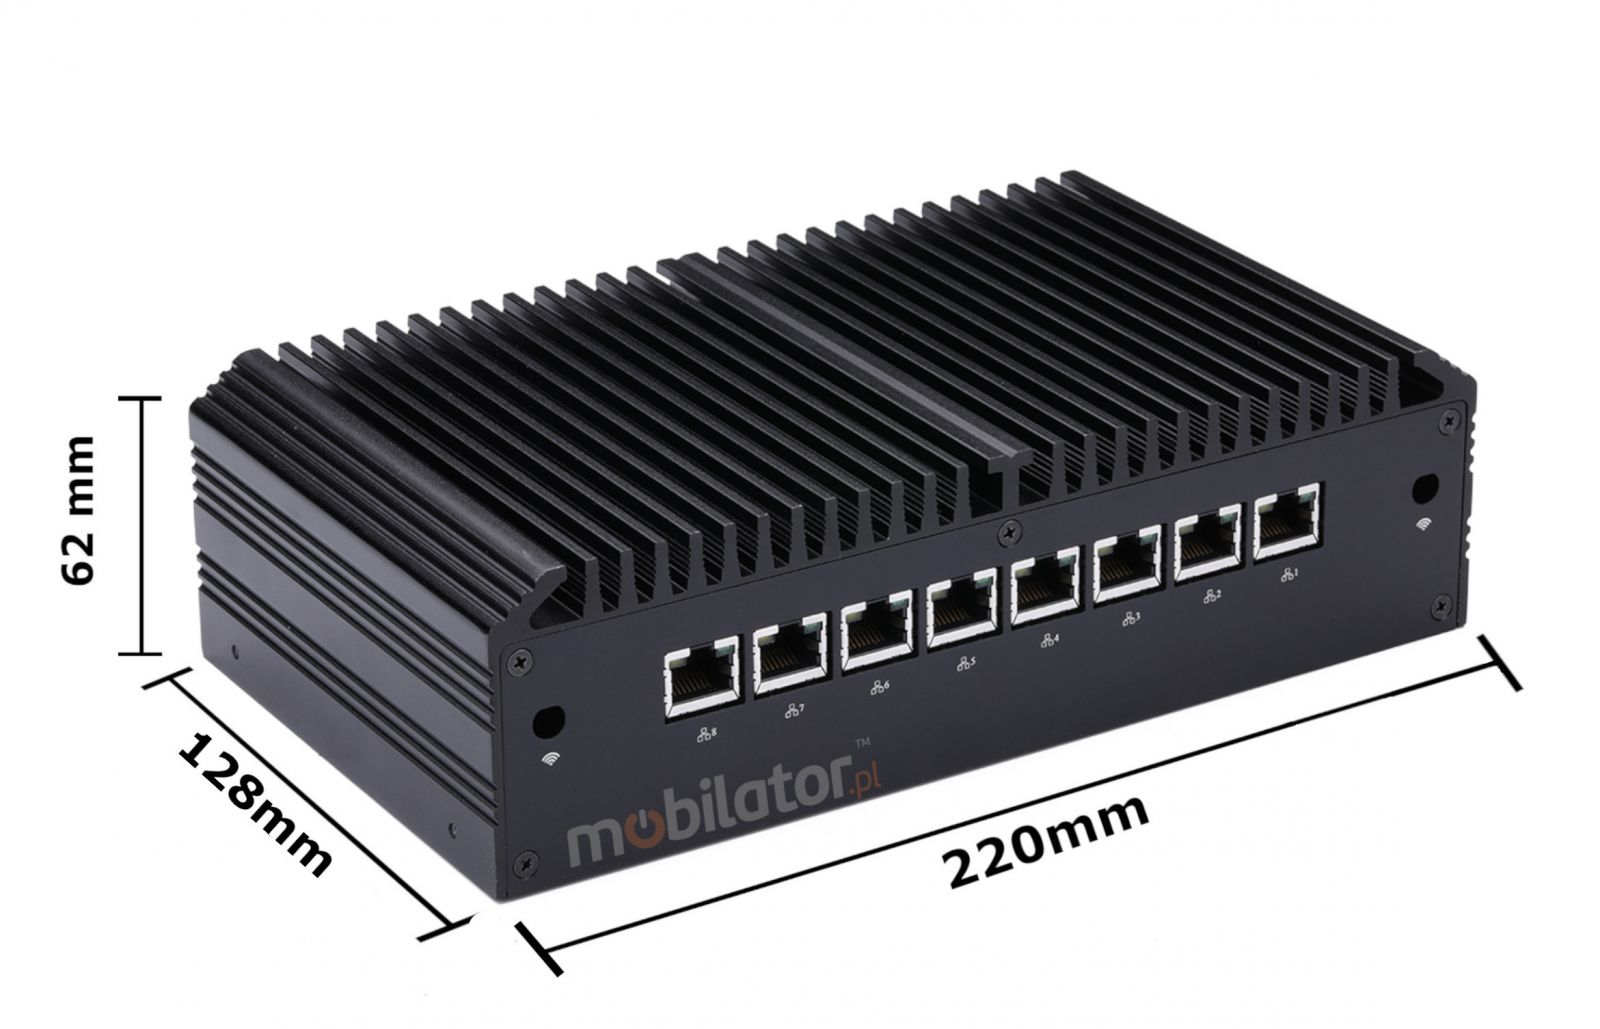 mBOX Q1012GE dimensions, version 1, small size